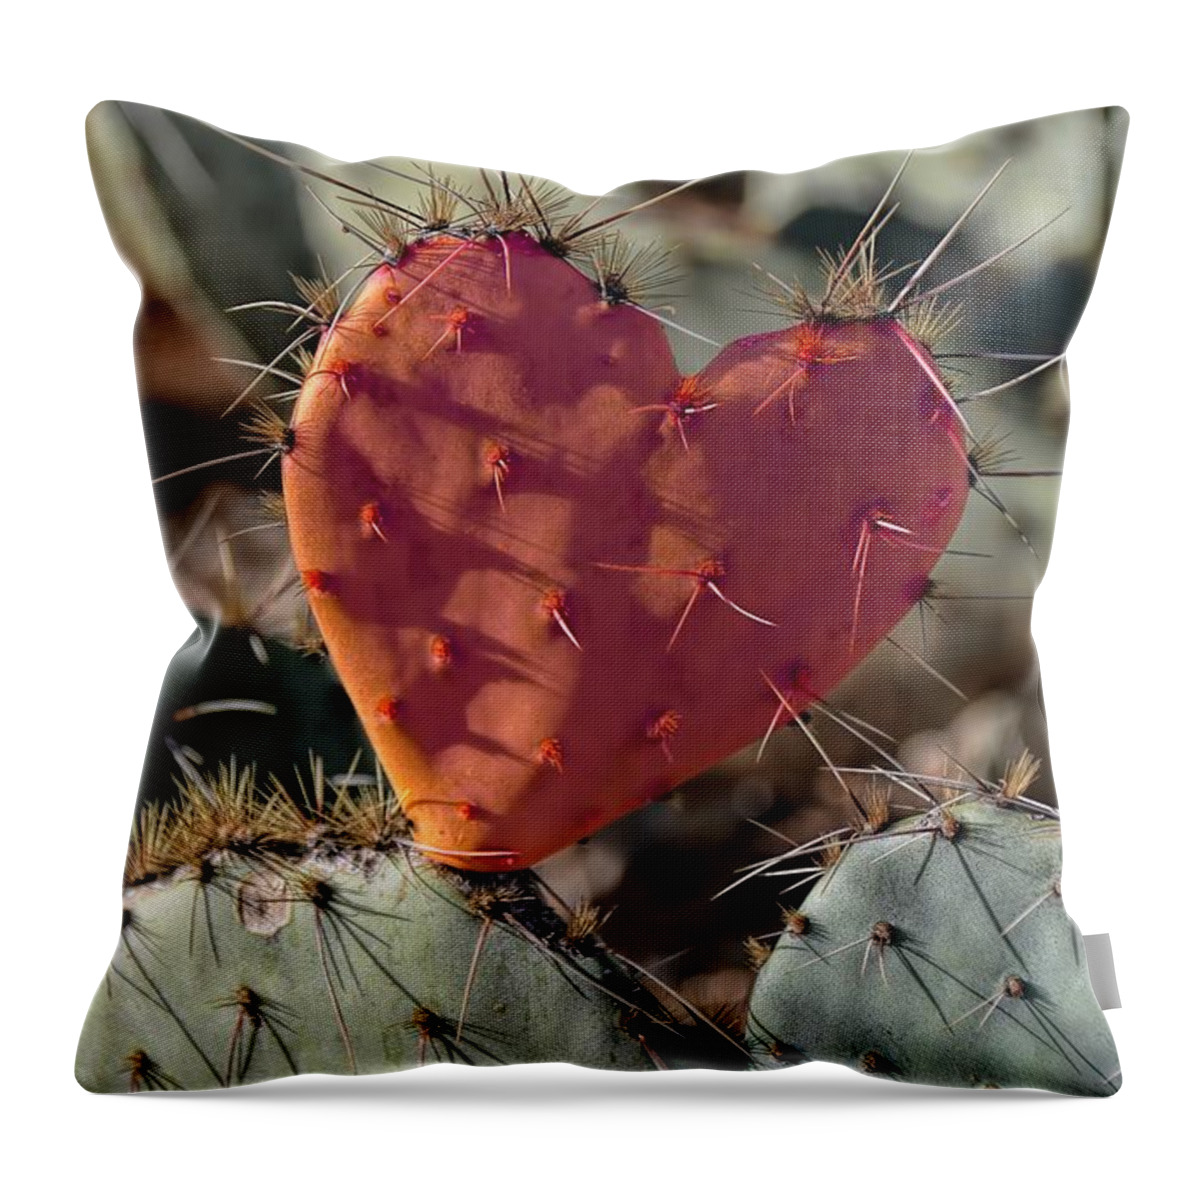 Valentine Throw Pillow featuring the photograph Valentine Prickly Pear Cactus by Henry Kowalski